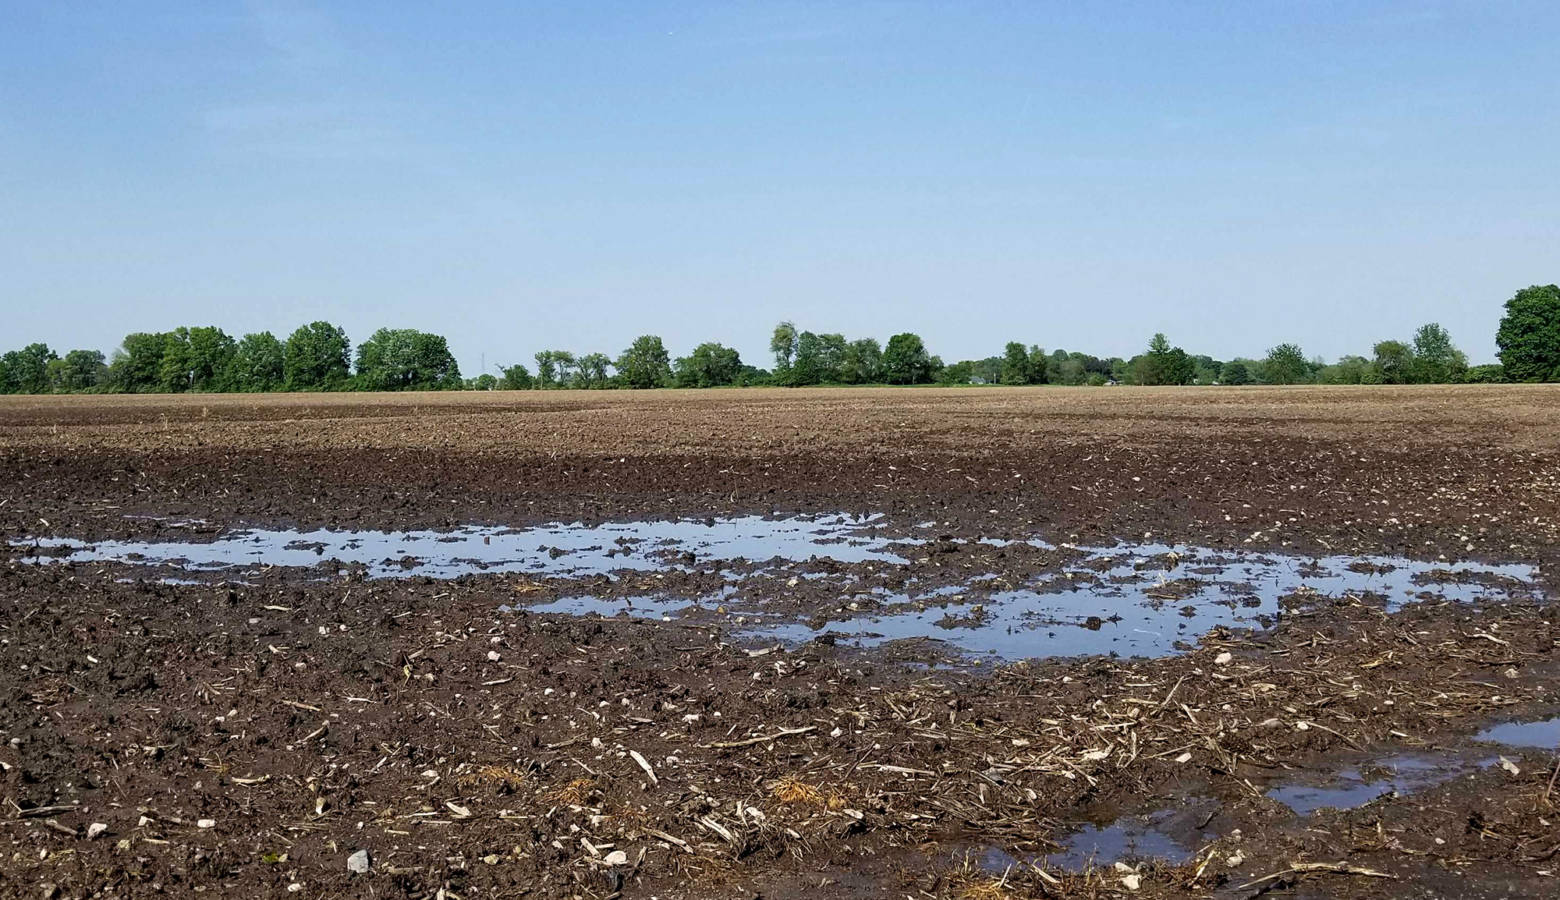 The rains have been preventing many farmers from being able to plant corn. (Samantha Horton/IPB News)